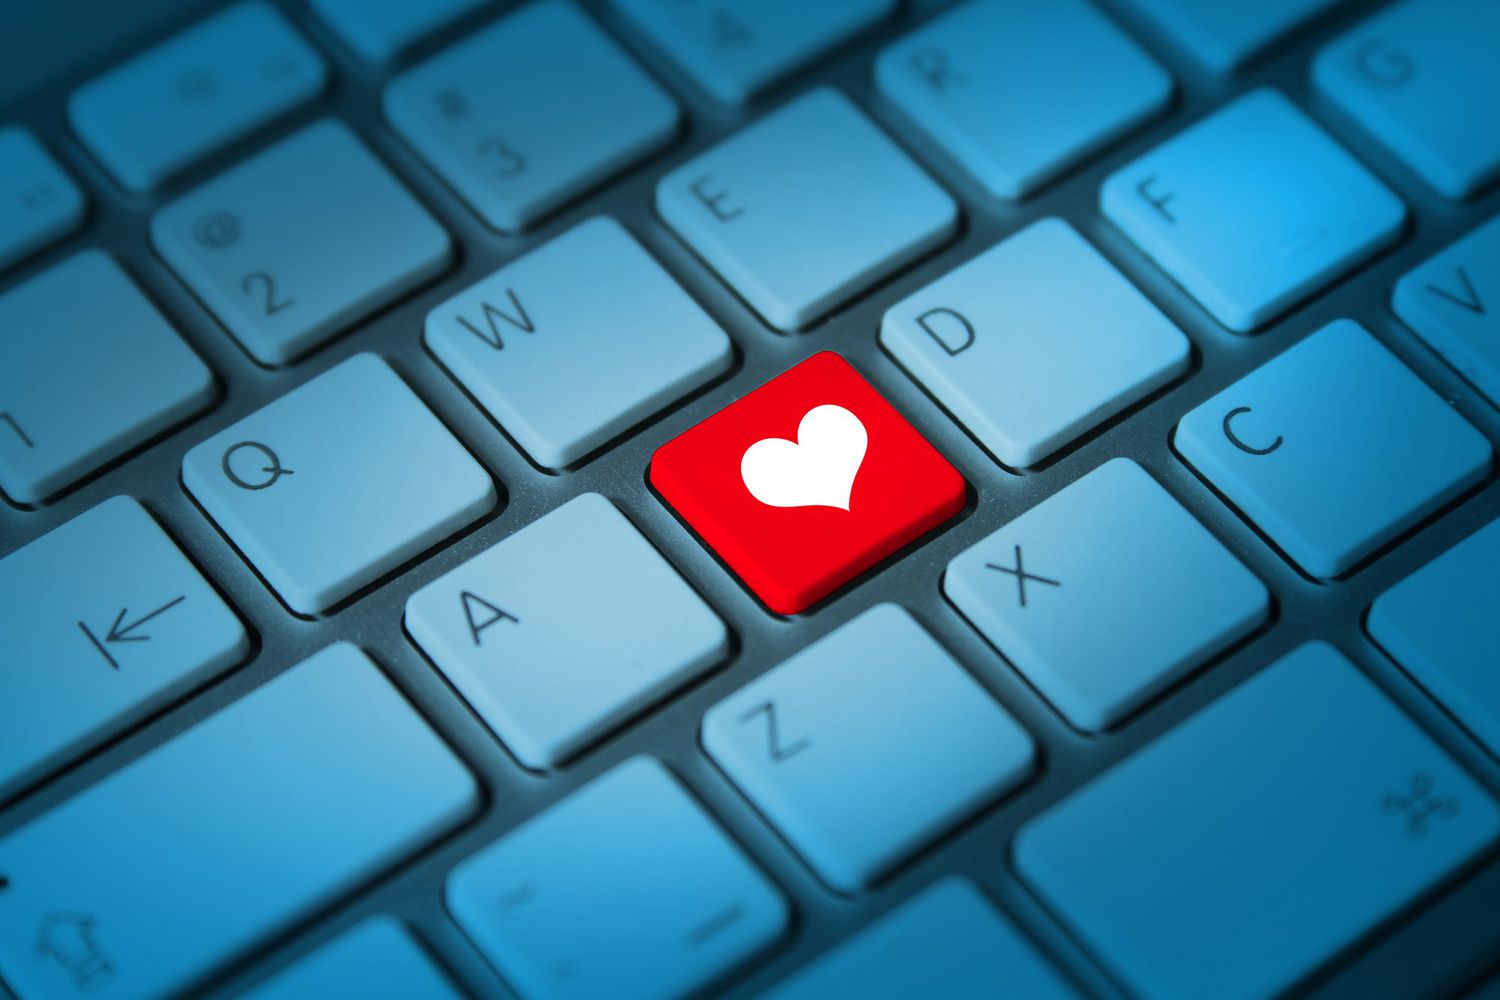 6 Things You Can Do To Make Your Online Dating Experience Safer.